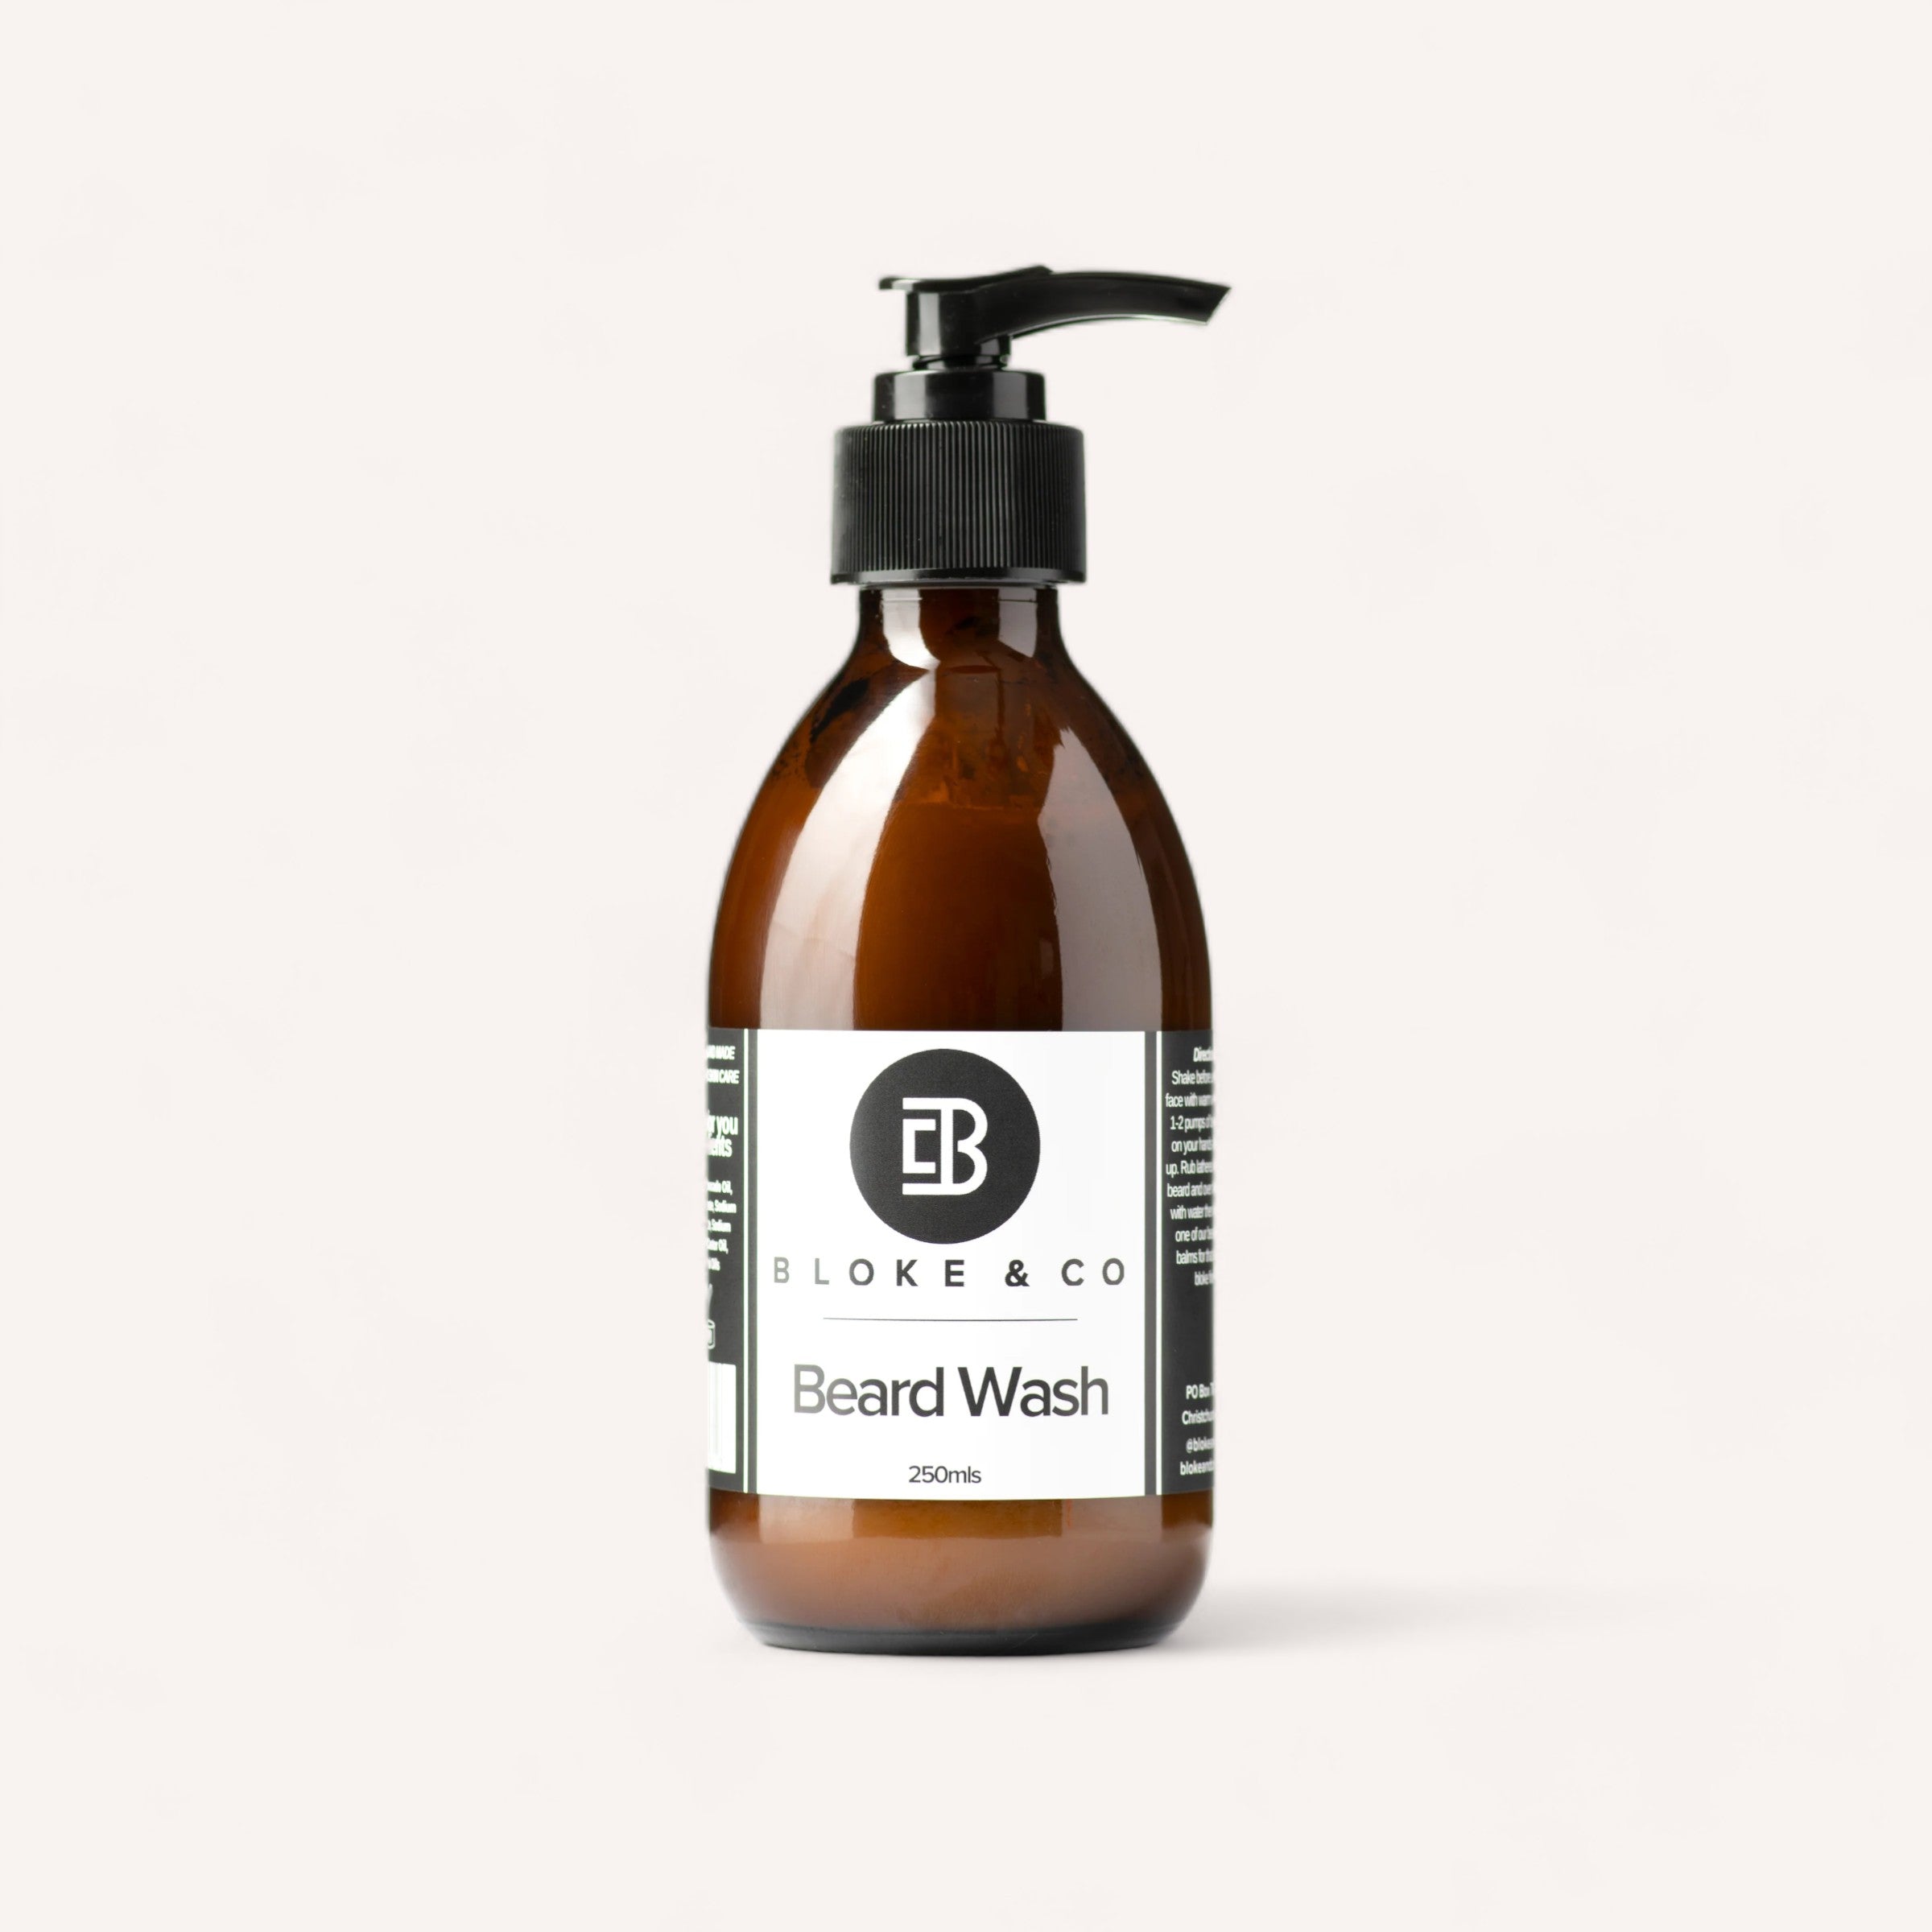 Amber glass bottle of Beard Wash by Bloke & Co with a pump dispenser, isolated on a white background.